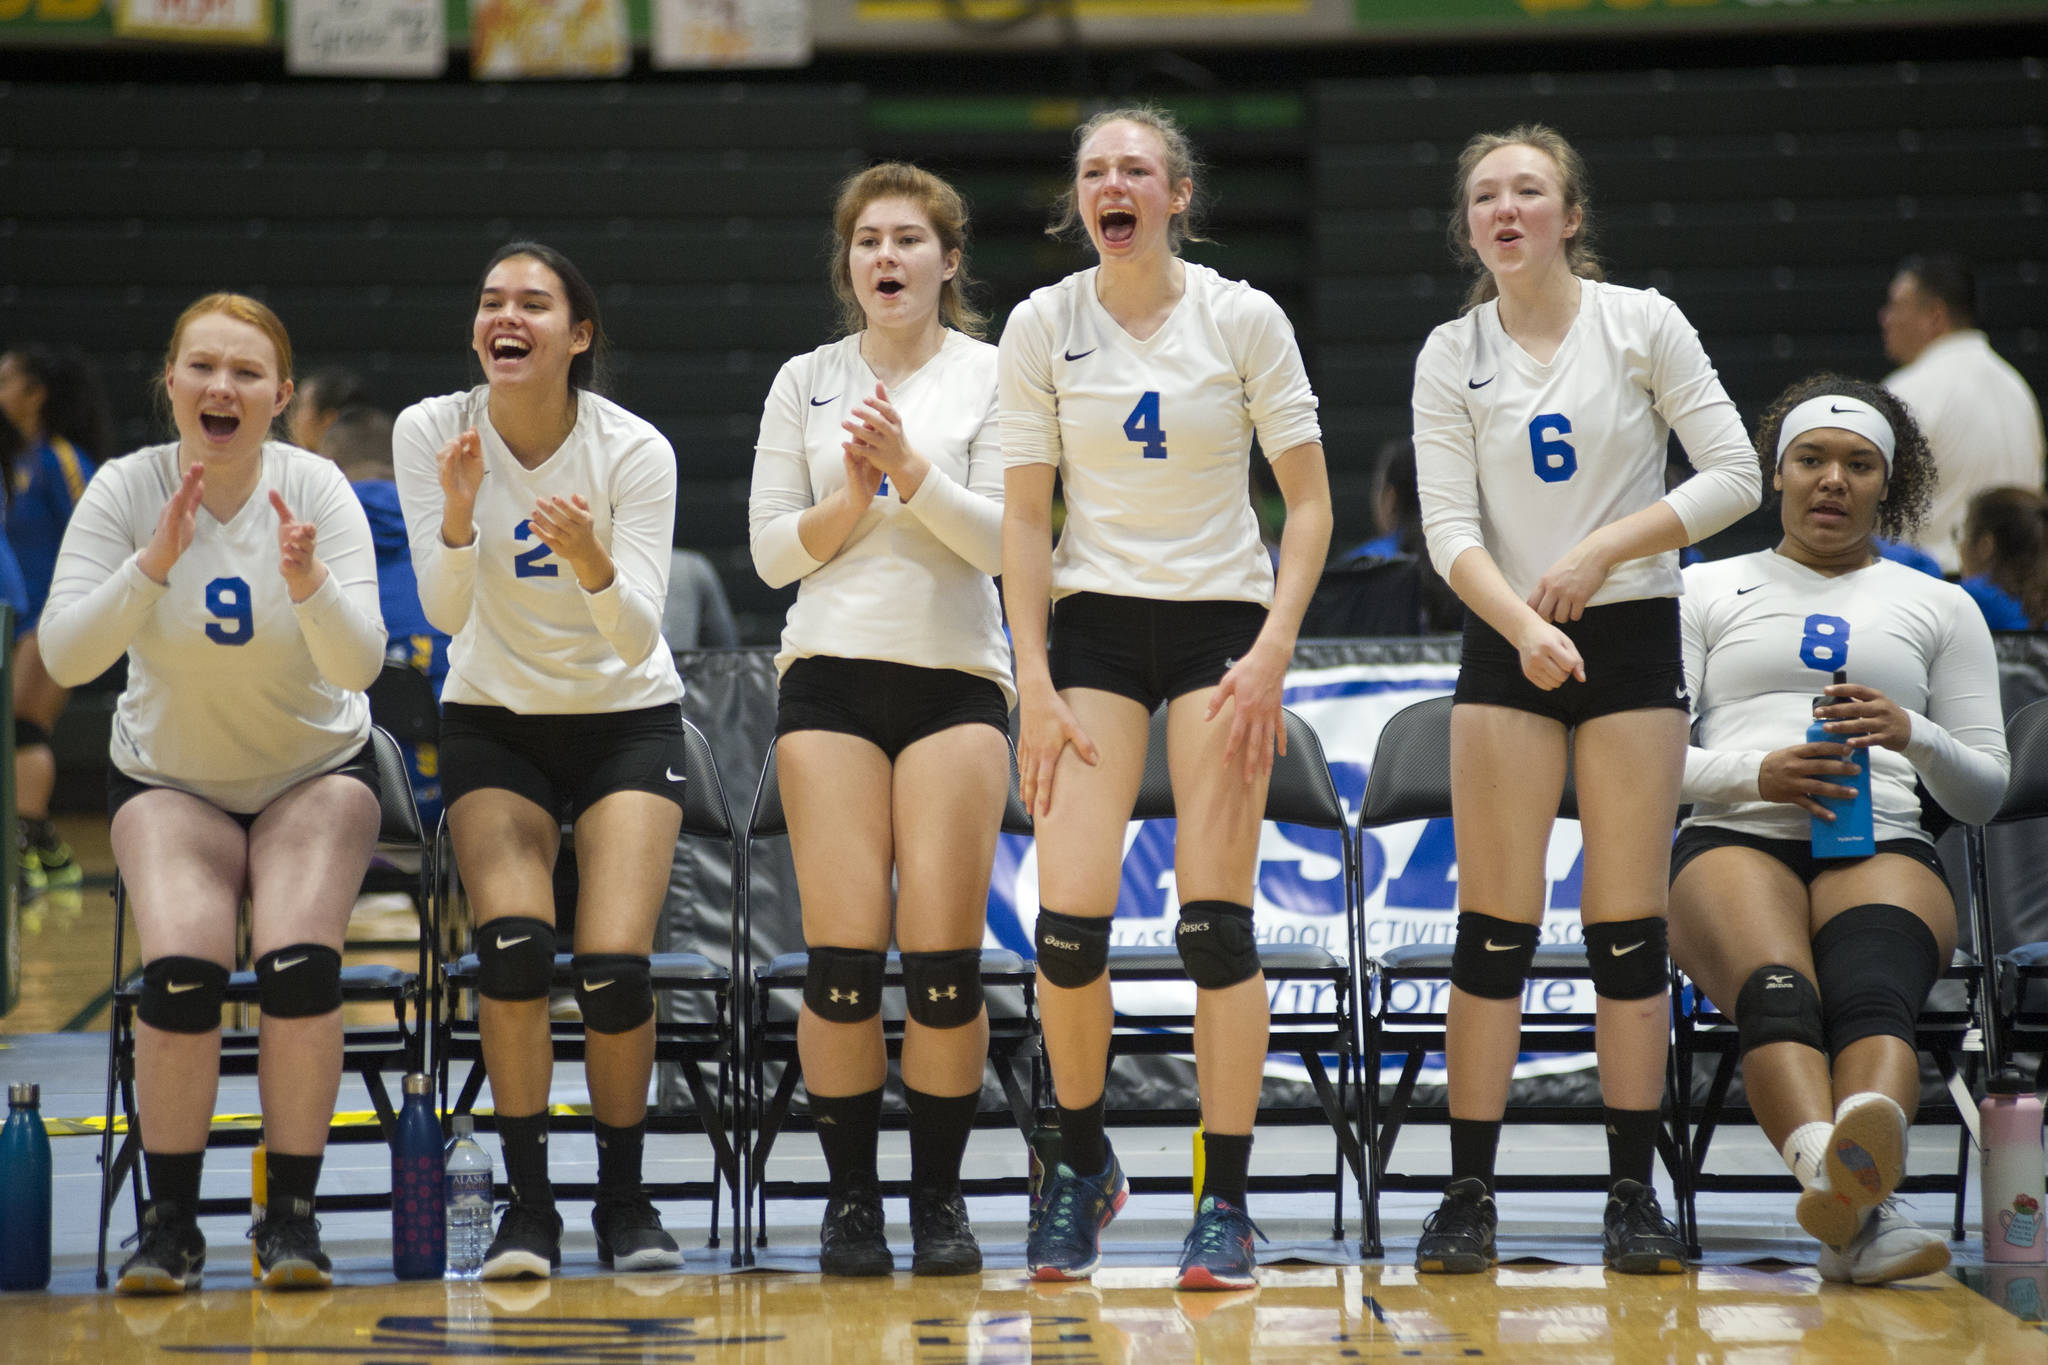 The Thunder Mountain High School bench celebrates a point against West Valley at the ASAA/First National Bank Alaska 3A/4A Volleyball State Championships on Friday at the Alaska Airlines Center in Anchorage. From left: Alex Murray, Amy Schoonover, Kiley Stevens, Sophia Harvey, Hannah Harvey, Kyra Jenkins Hayes. (Nolin Ainsworth | Juneau Empire)